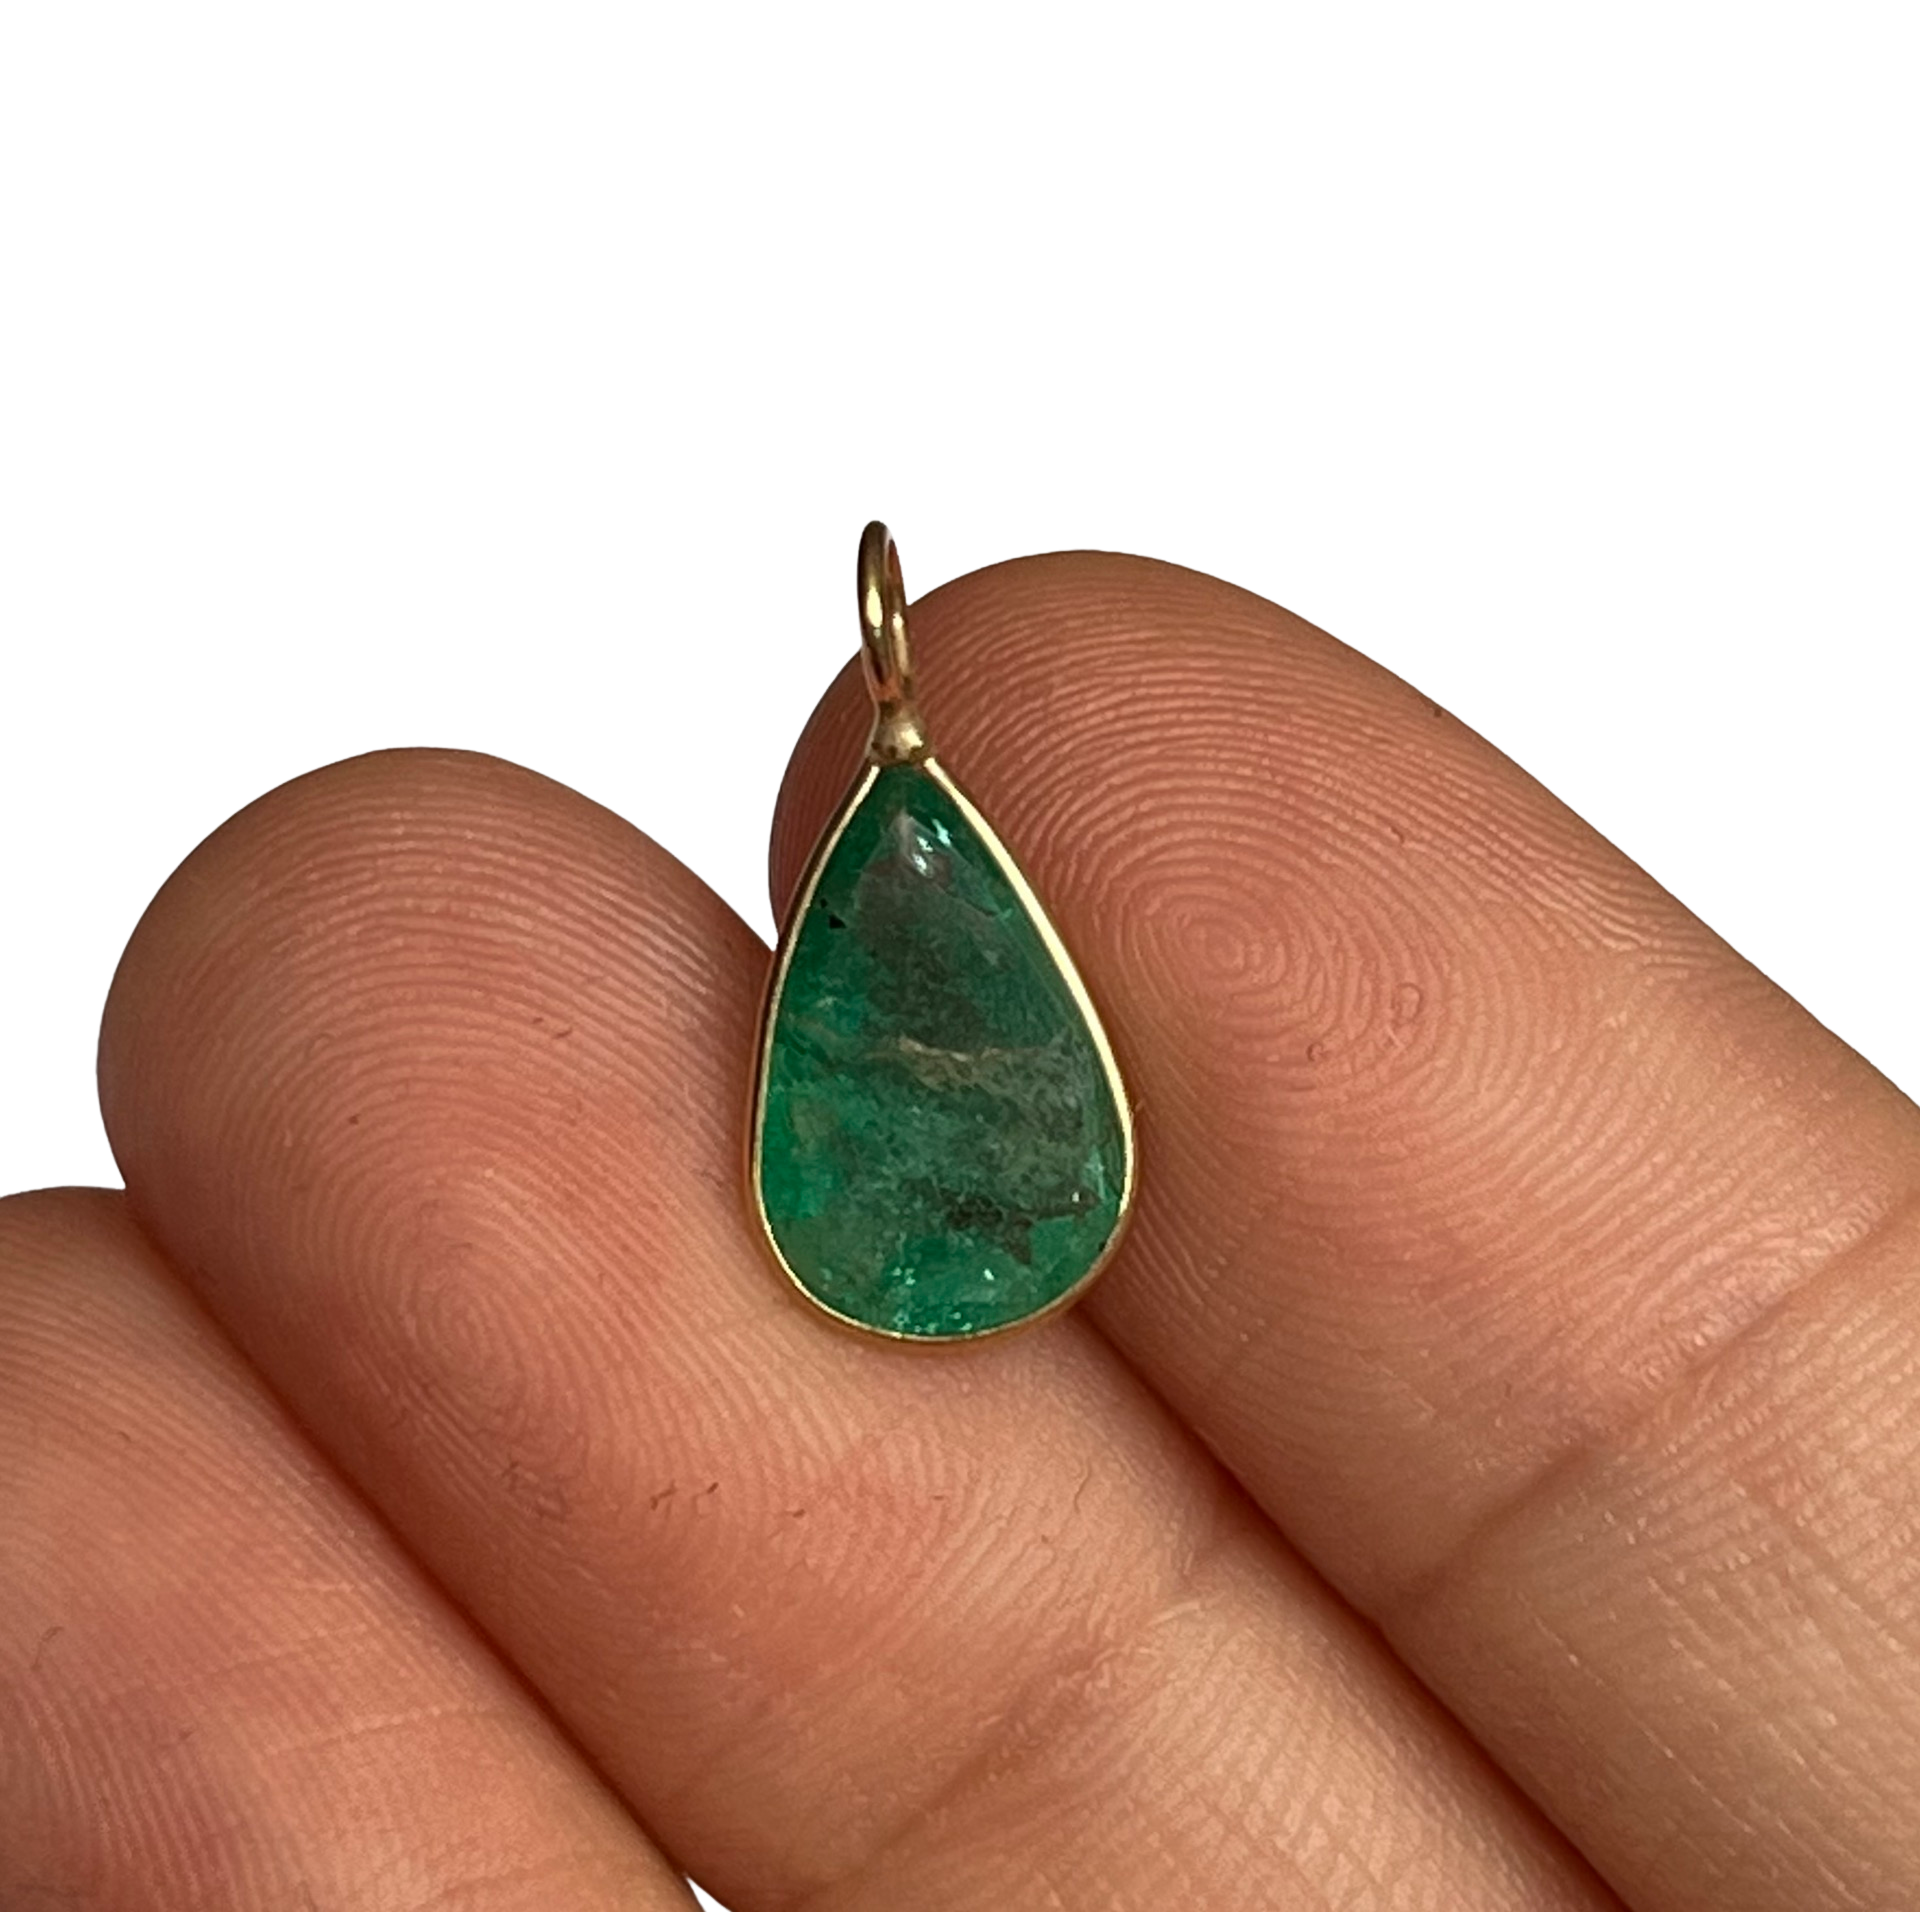 1.8ct Pear Shaped Colombian Emerald 14K Yellow Gold Pendant Charm 17x8mm